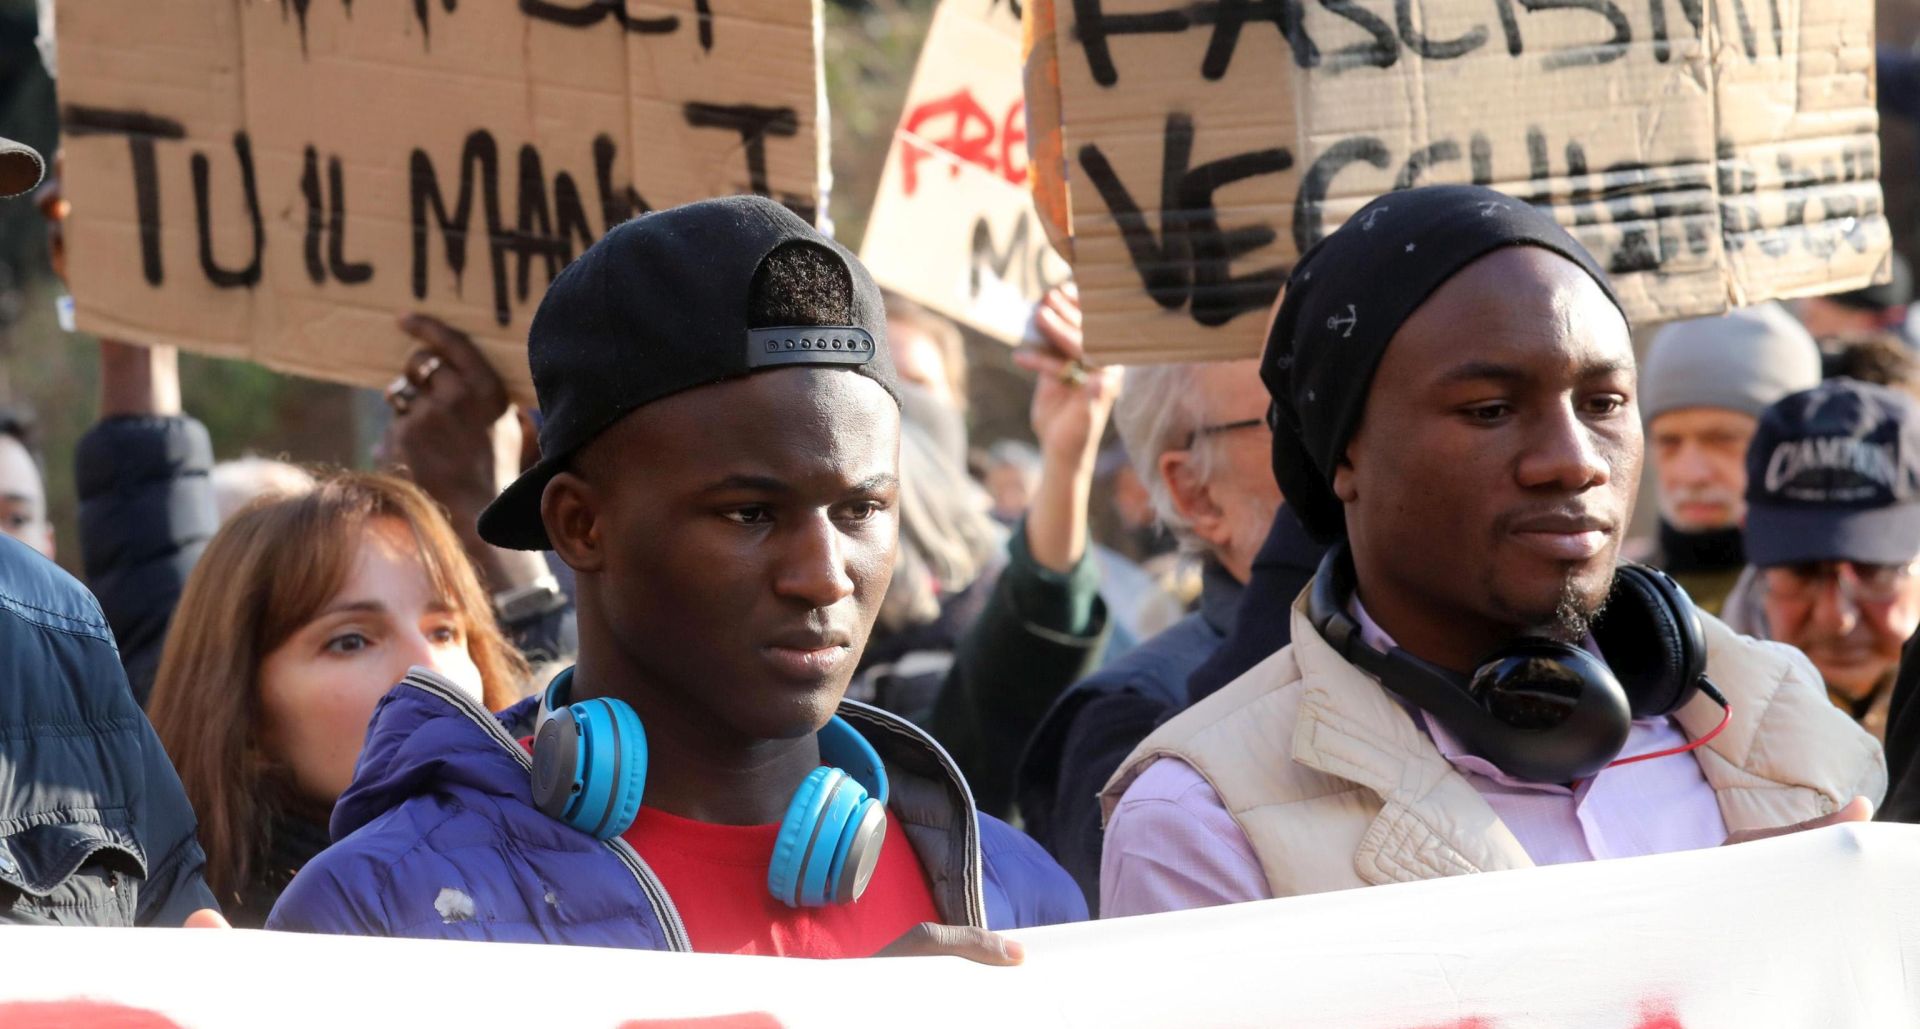 epa06512084 Demonstrators march during an anti-racism rally in Milan, Italy, 10 February 2018. The protest is organised in response to the attack by an Italian nationalist Luca Traini who has confessed to opening fire on African migrants in the central city of Macerata, injuring several people, in an attack that appeared to be racially motivated.  EPA/MATTEO BAZZI